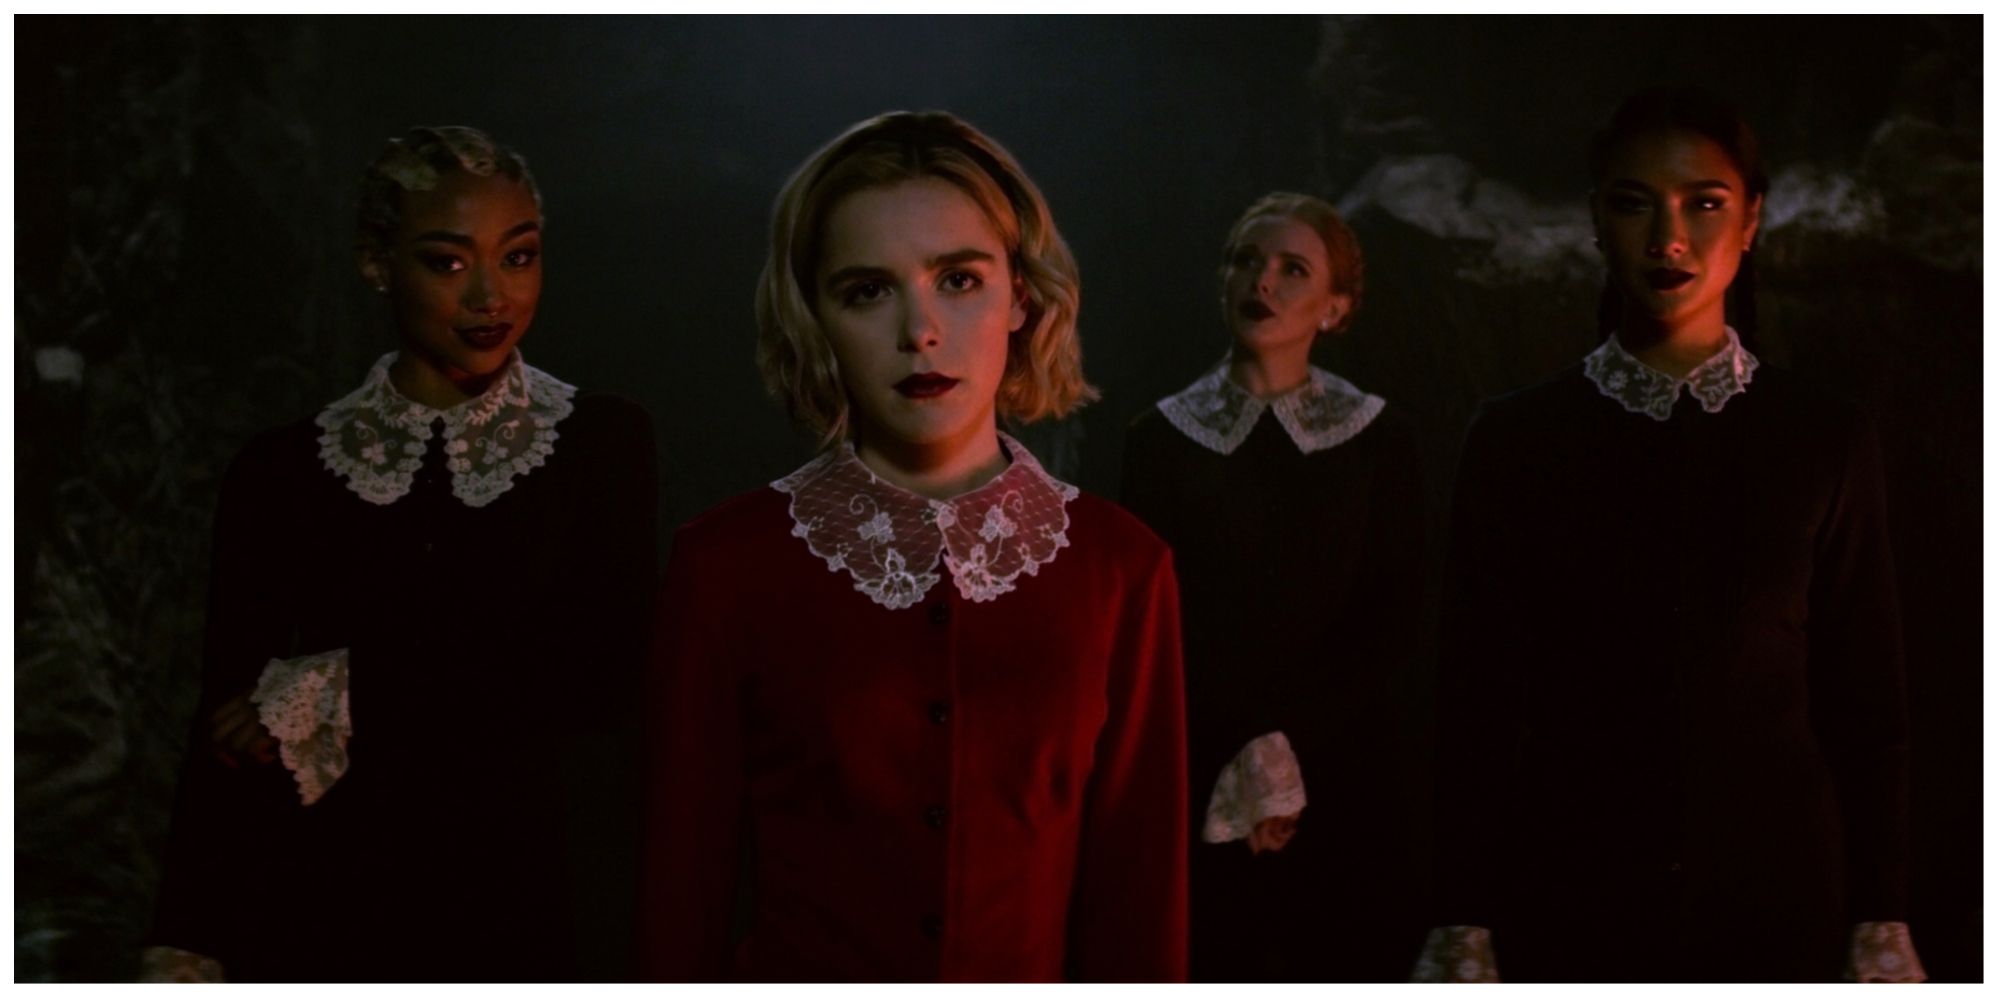 Sabrina stood at her Dark Baptism looking stern with supporting cast members, fellow classmates, stood behind her